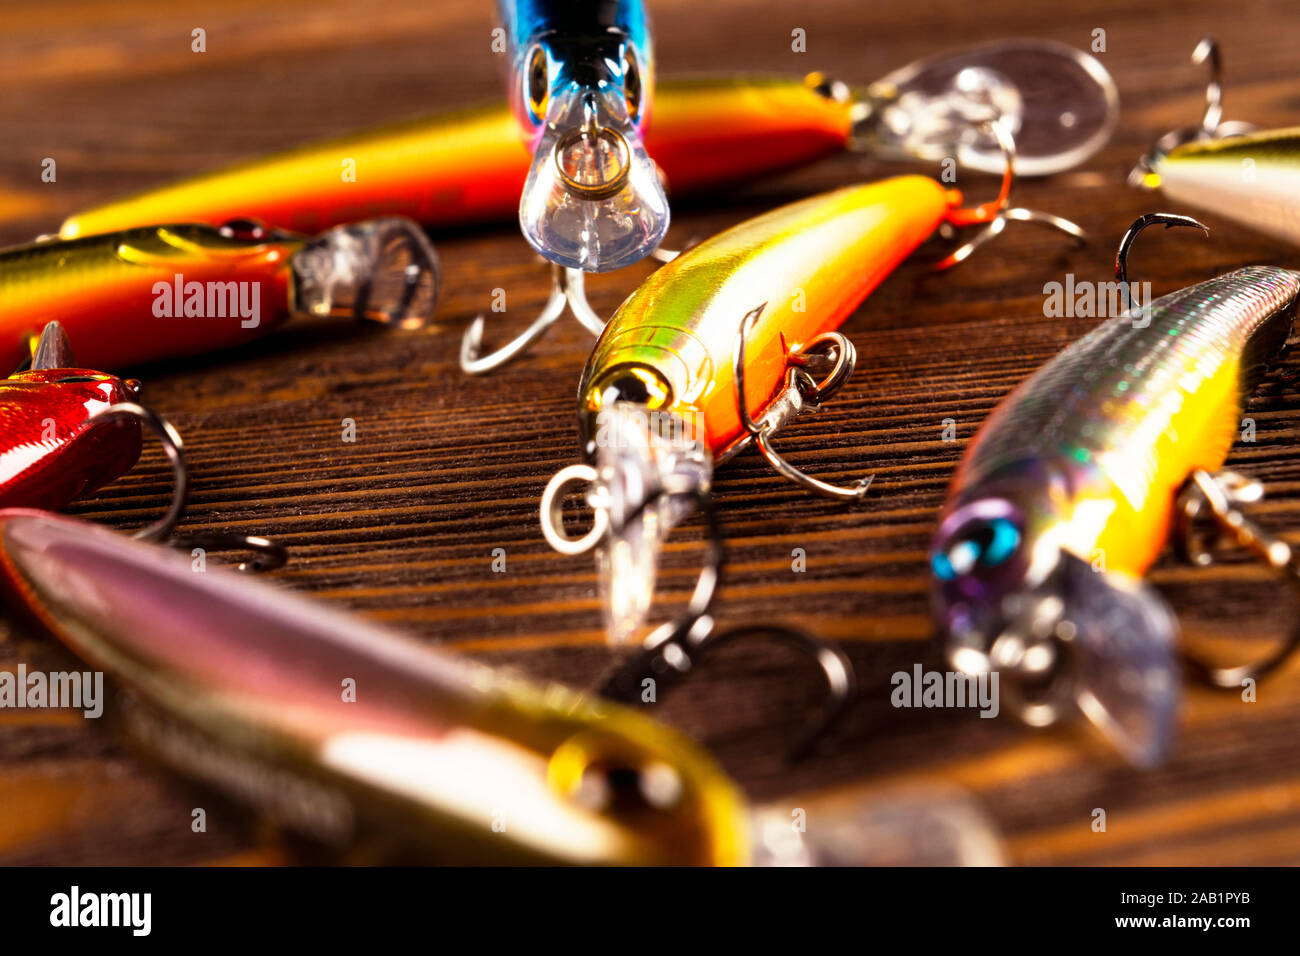 Download fishing lure wallpaper Bhmpics